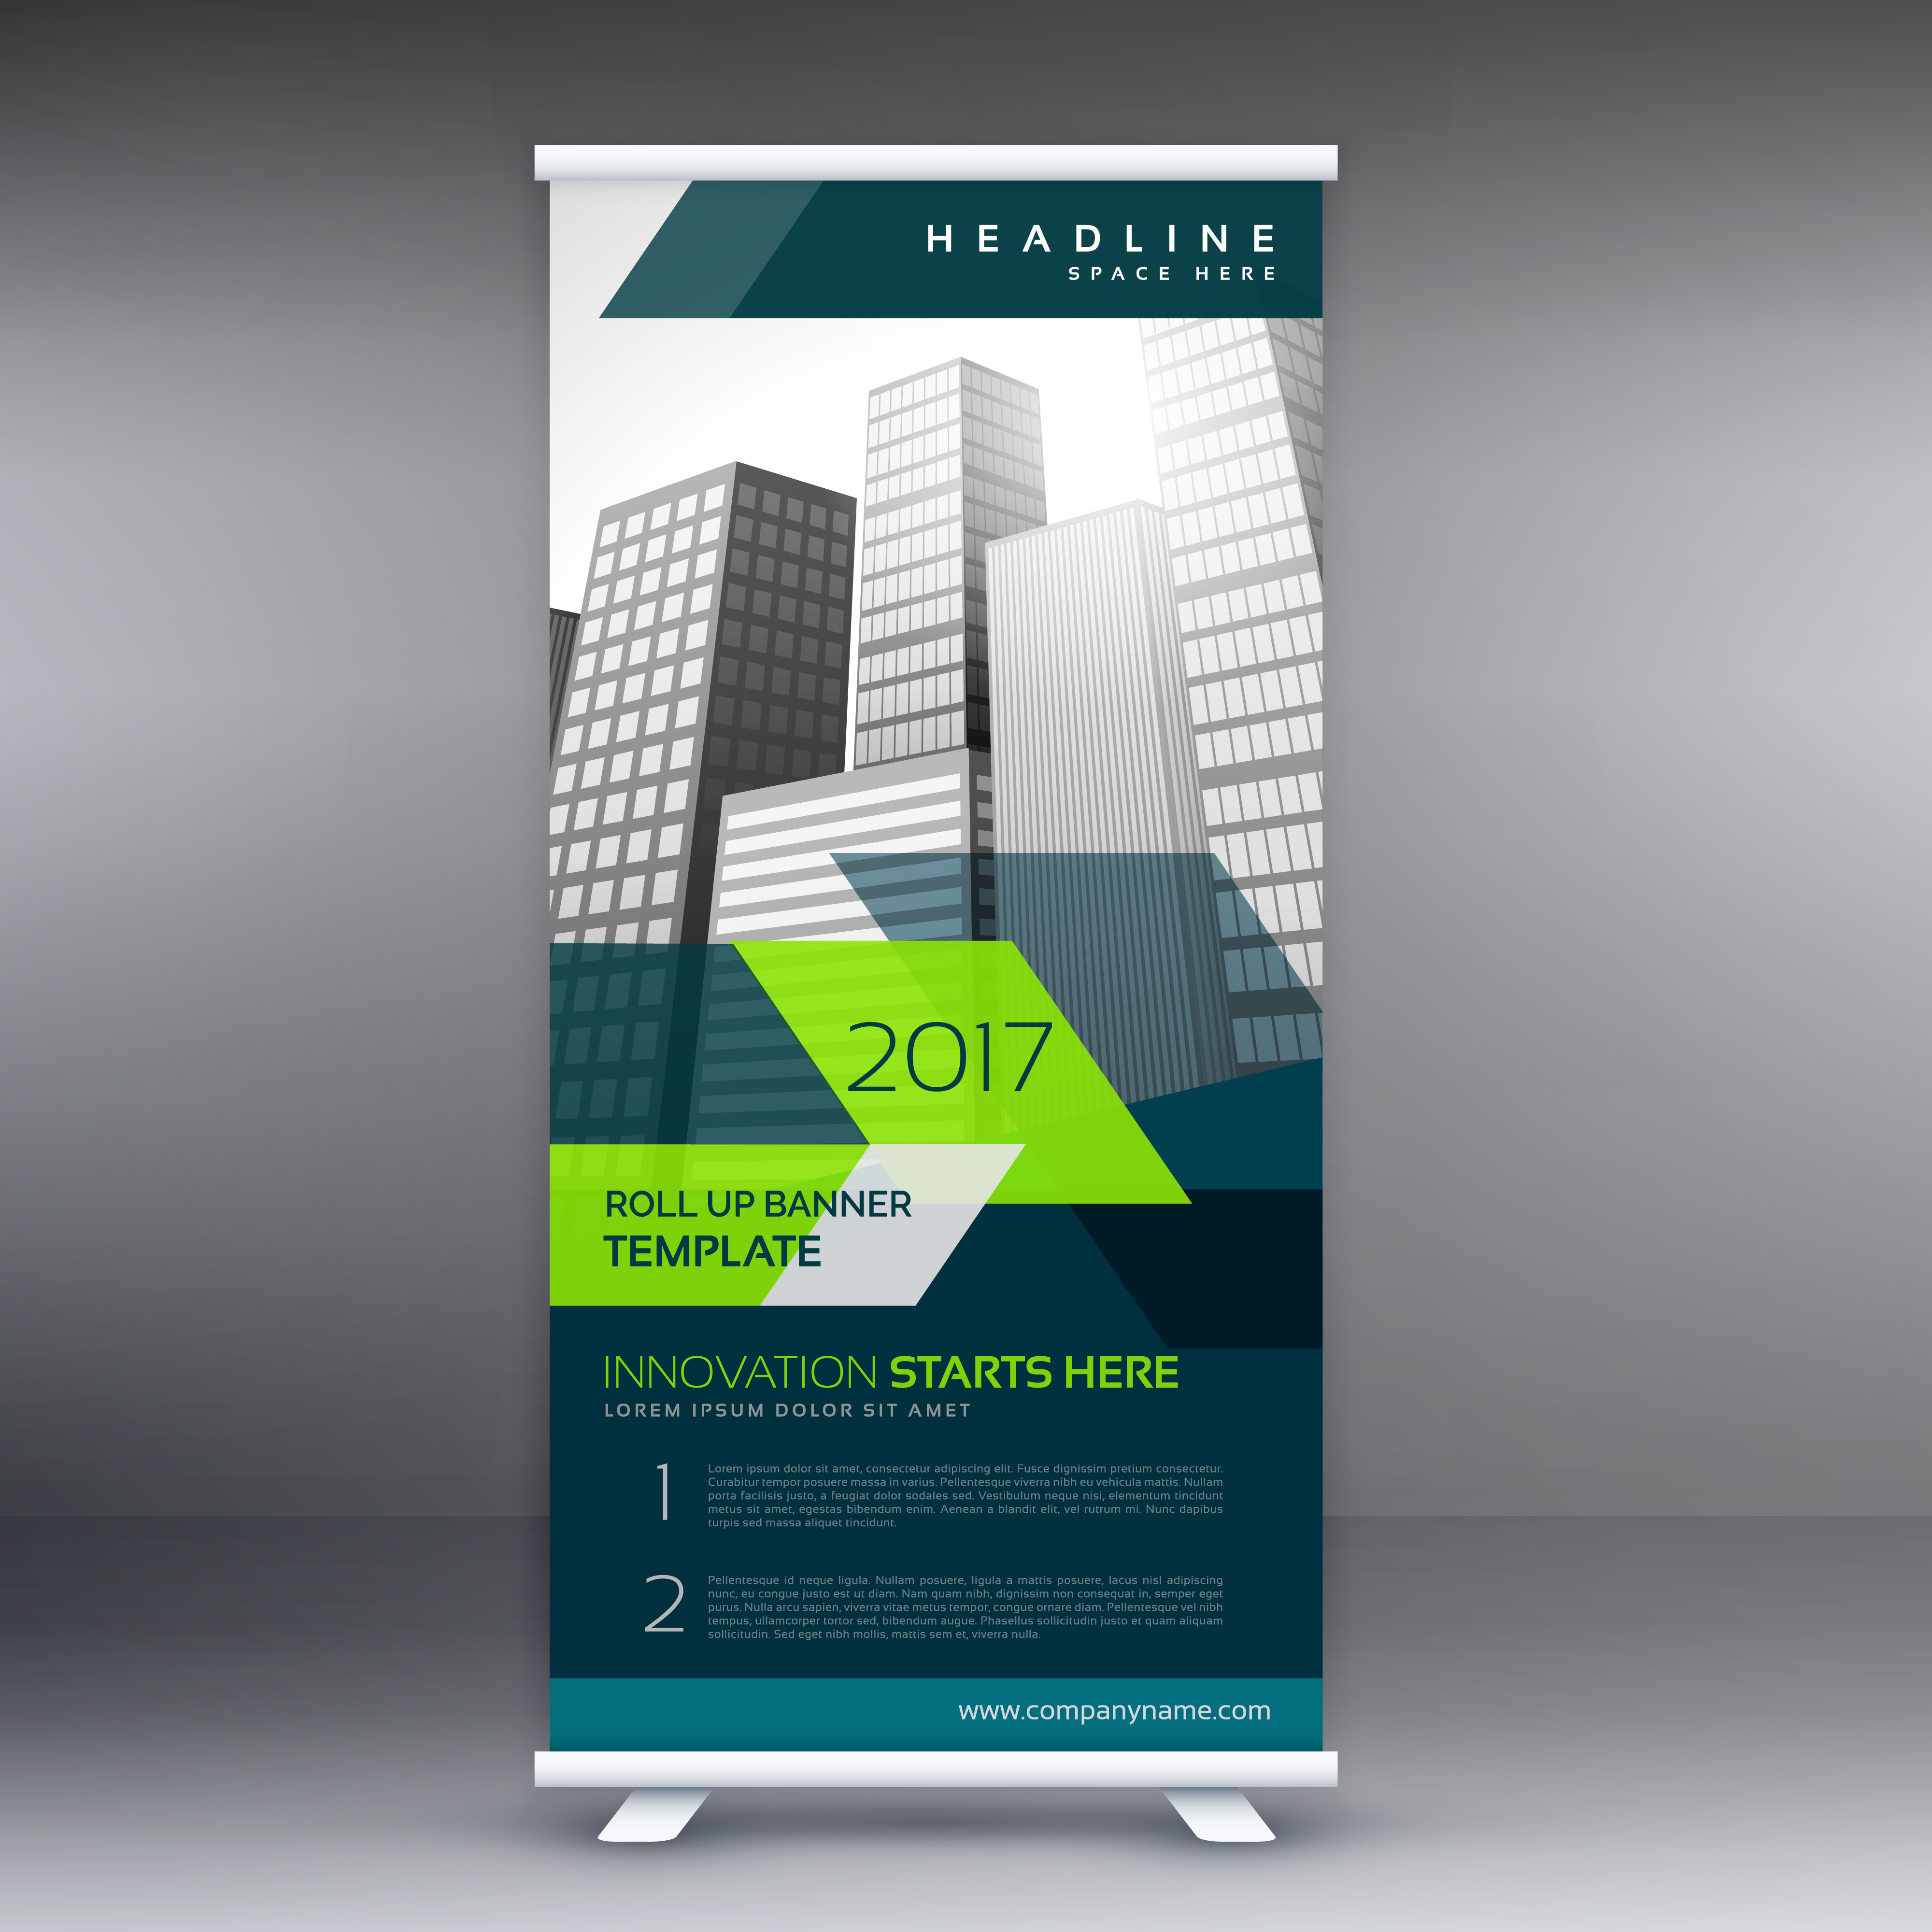  roll up banner stand template for your business 